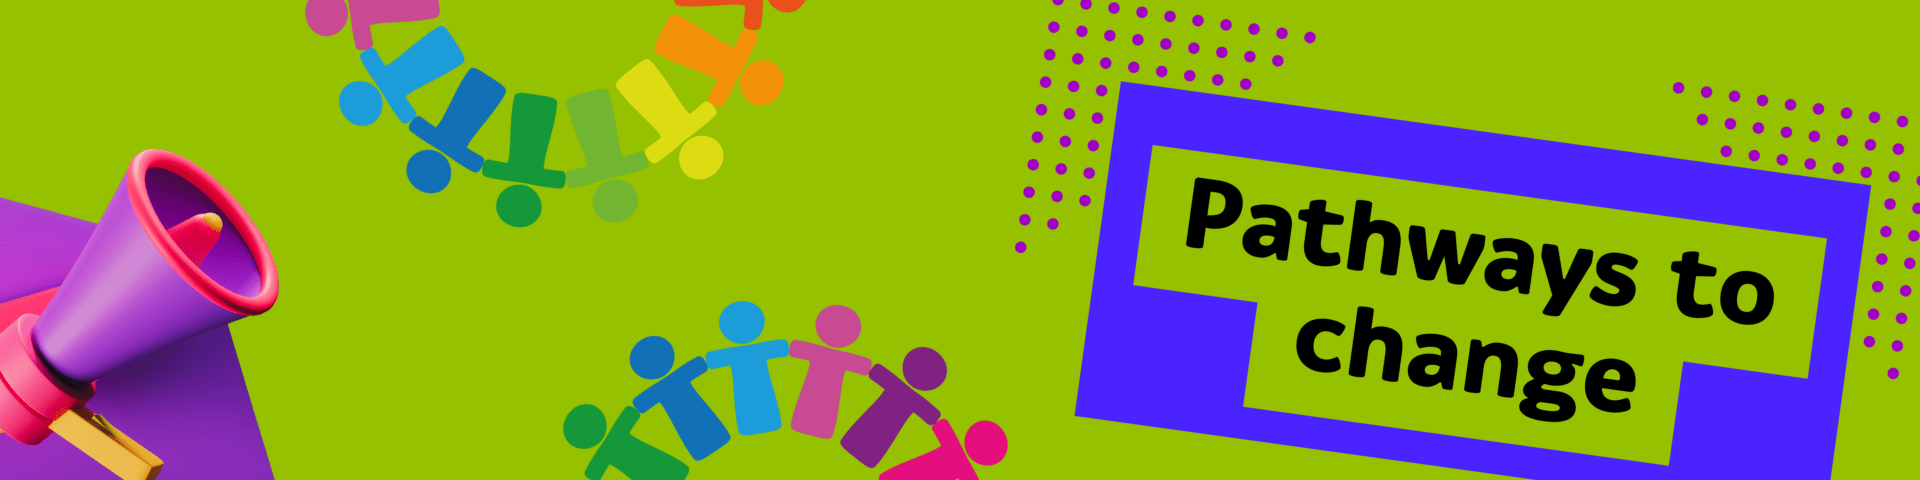 Banner with a bright green background and the project title 'Pathways to Change' in a bold font. Also on the banner is a graphic of a purple megaphone and two graphics of multi colour people that are touching hands in a semi-circle